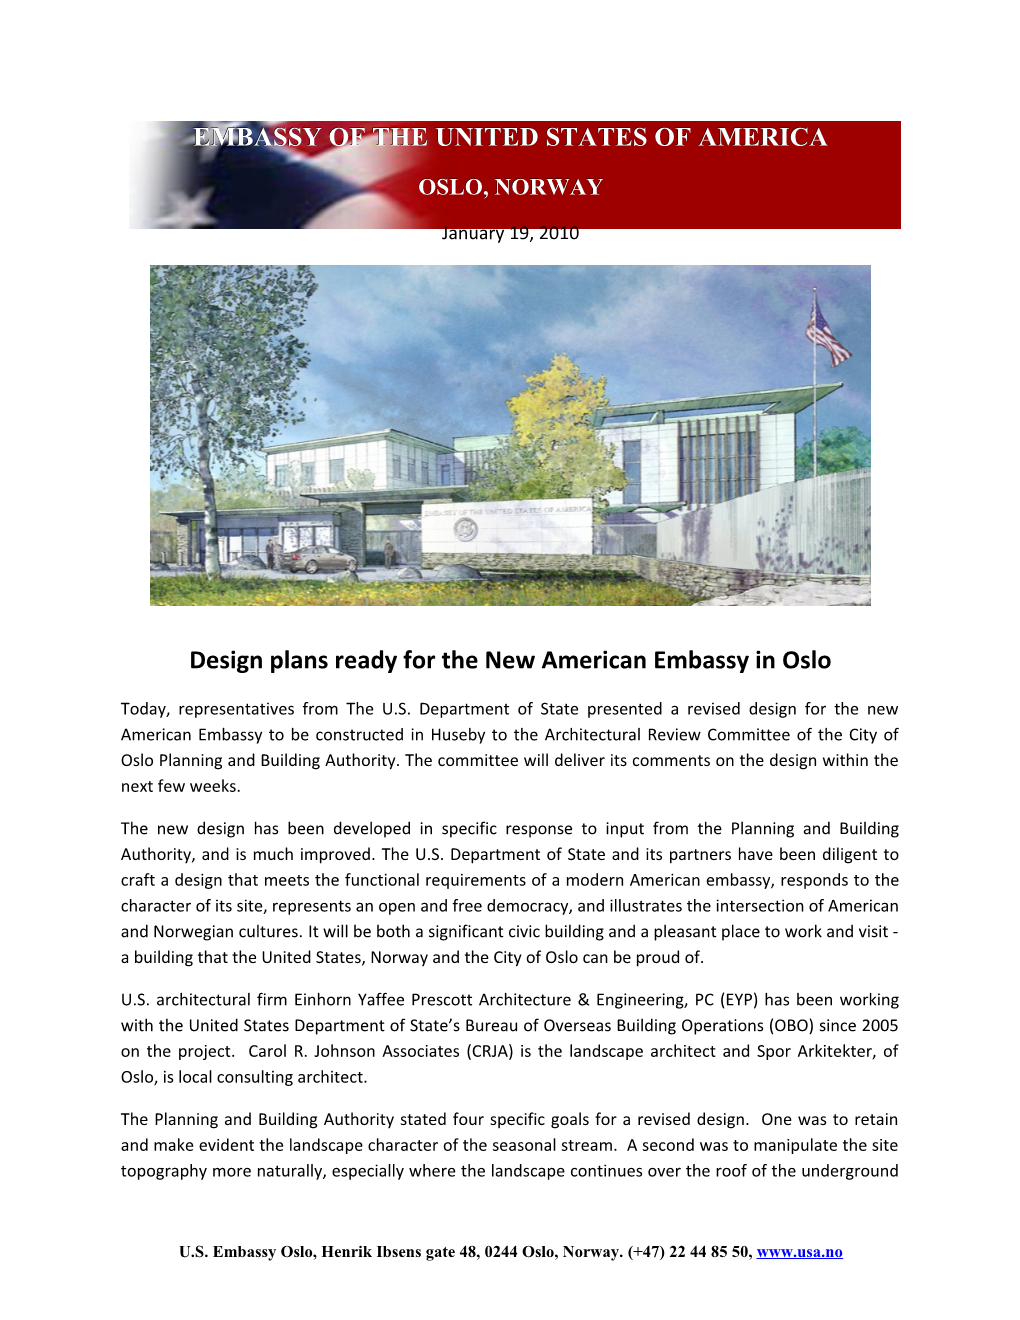 Design Plans Ready for the New American Embassy in Oslo